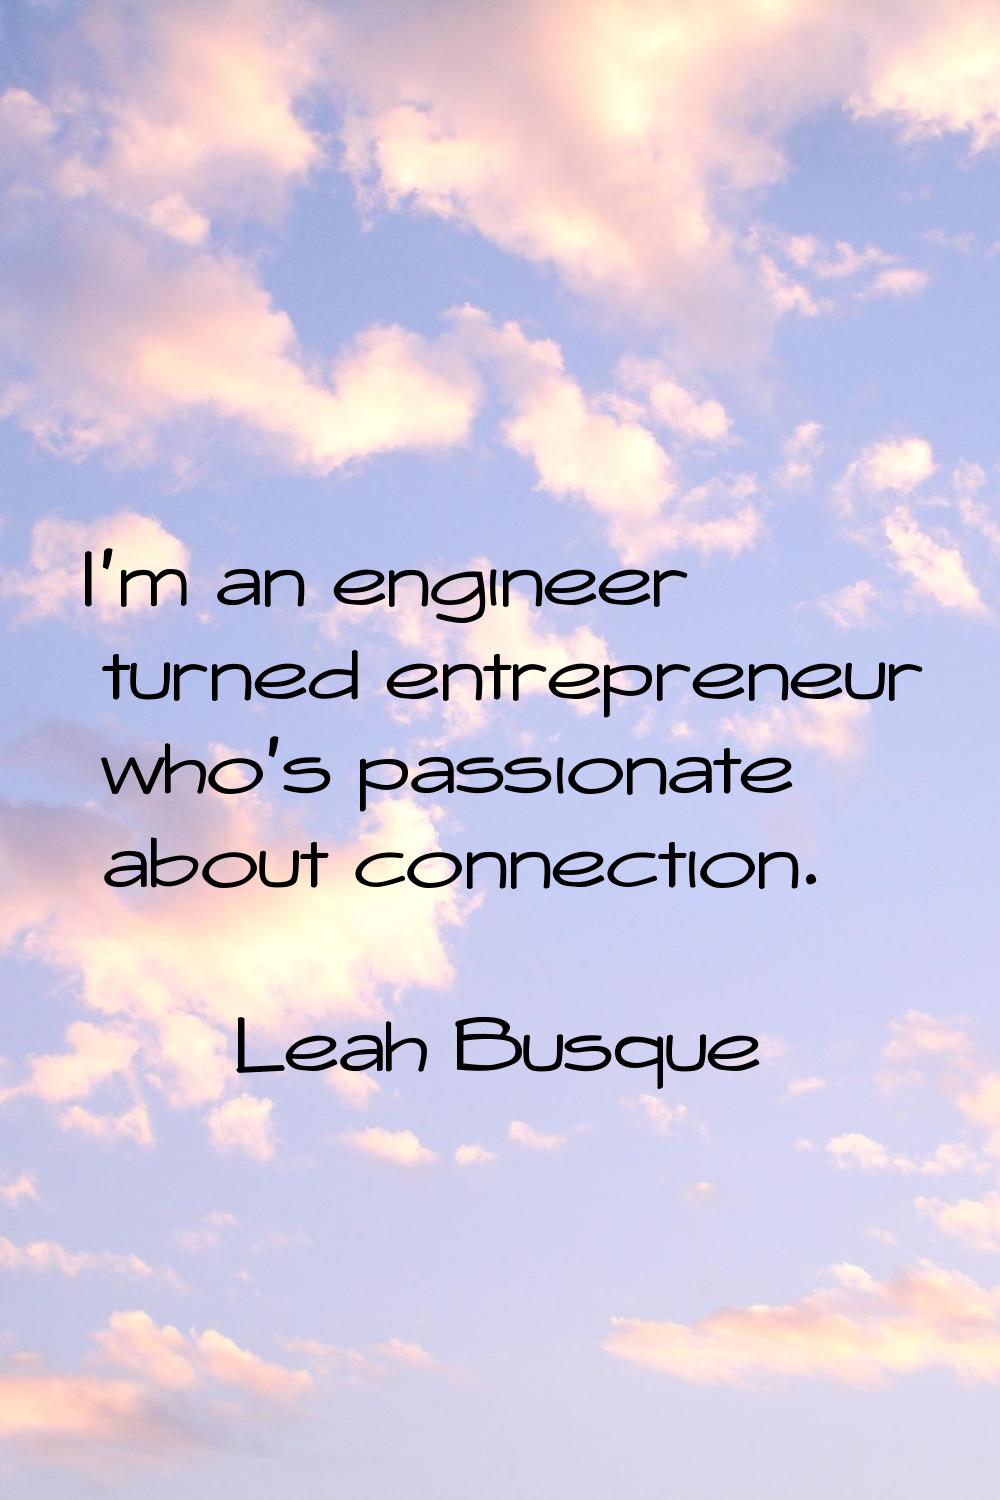 I'm an engineer turned entrepreneur who's passionate about connection.